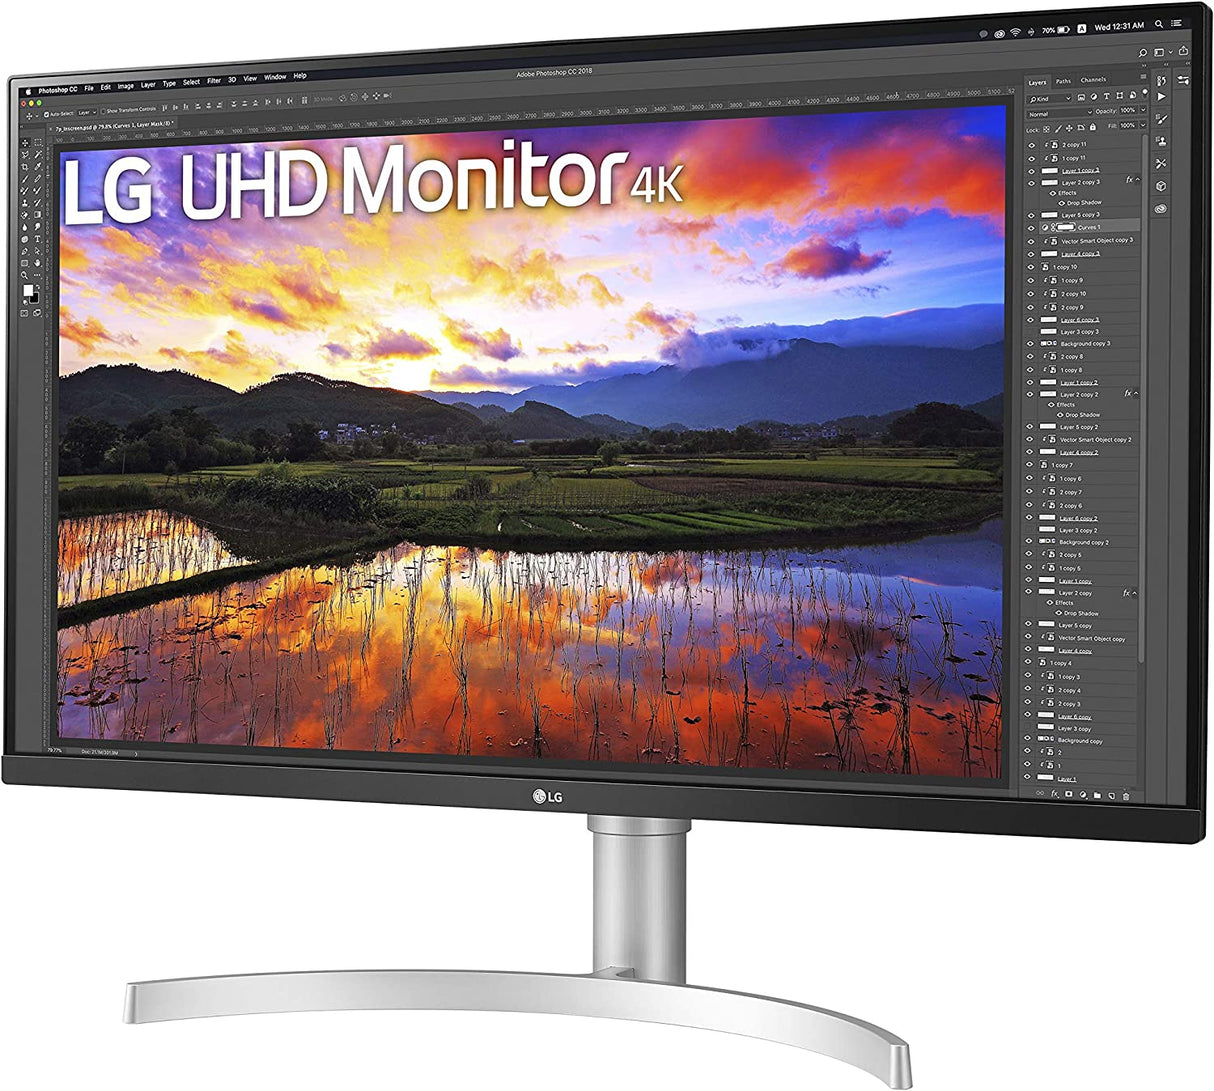 LG 32UN650-W 31.5 Inch UHD (3840 x 2160) IPS Ultrafine Display with HDR10 Compatibility, DCI-P3 95% Color Gamut, AMD FreeSync, and 3-Side Virtually Borderless Height Adjustable Stand, Silve/White